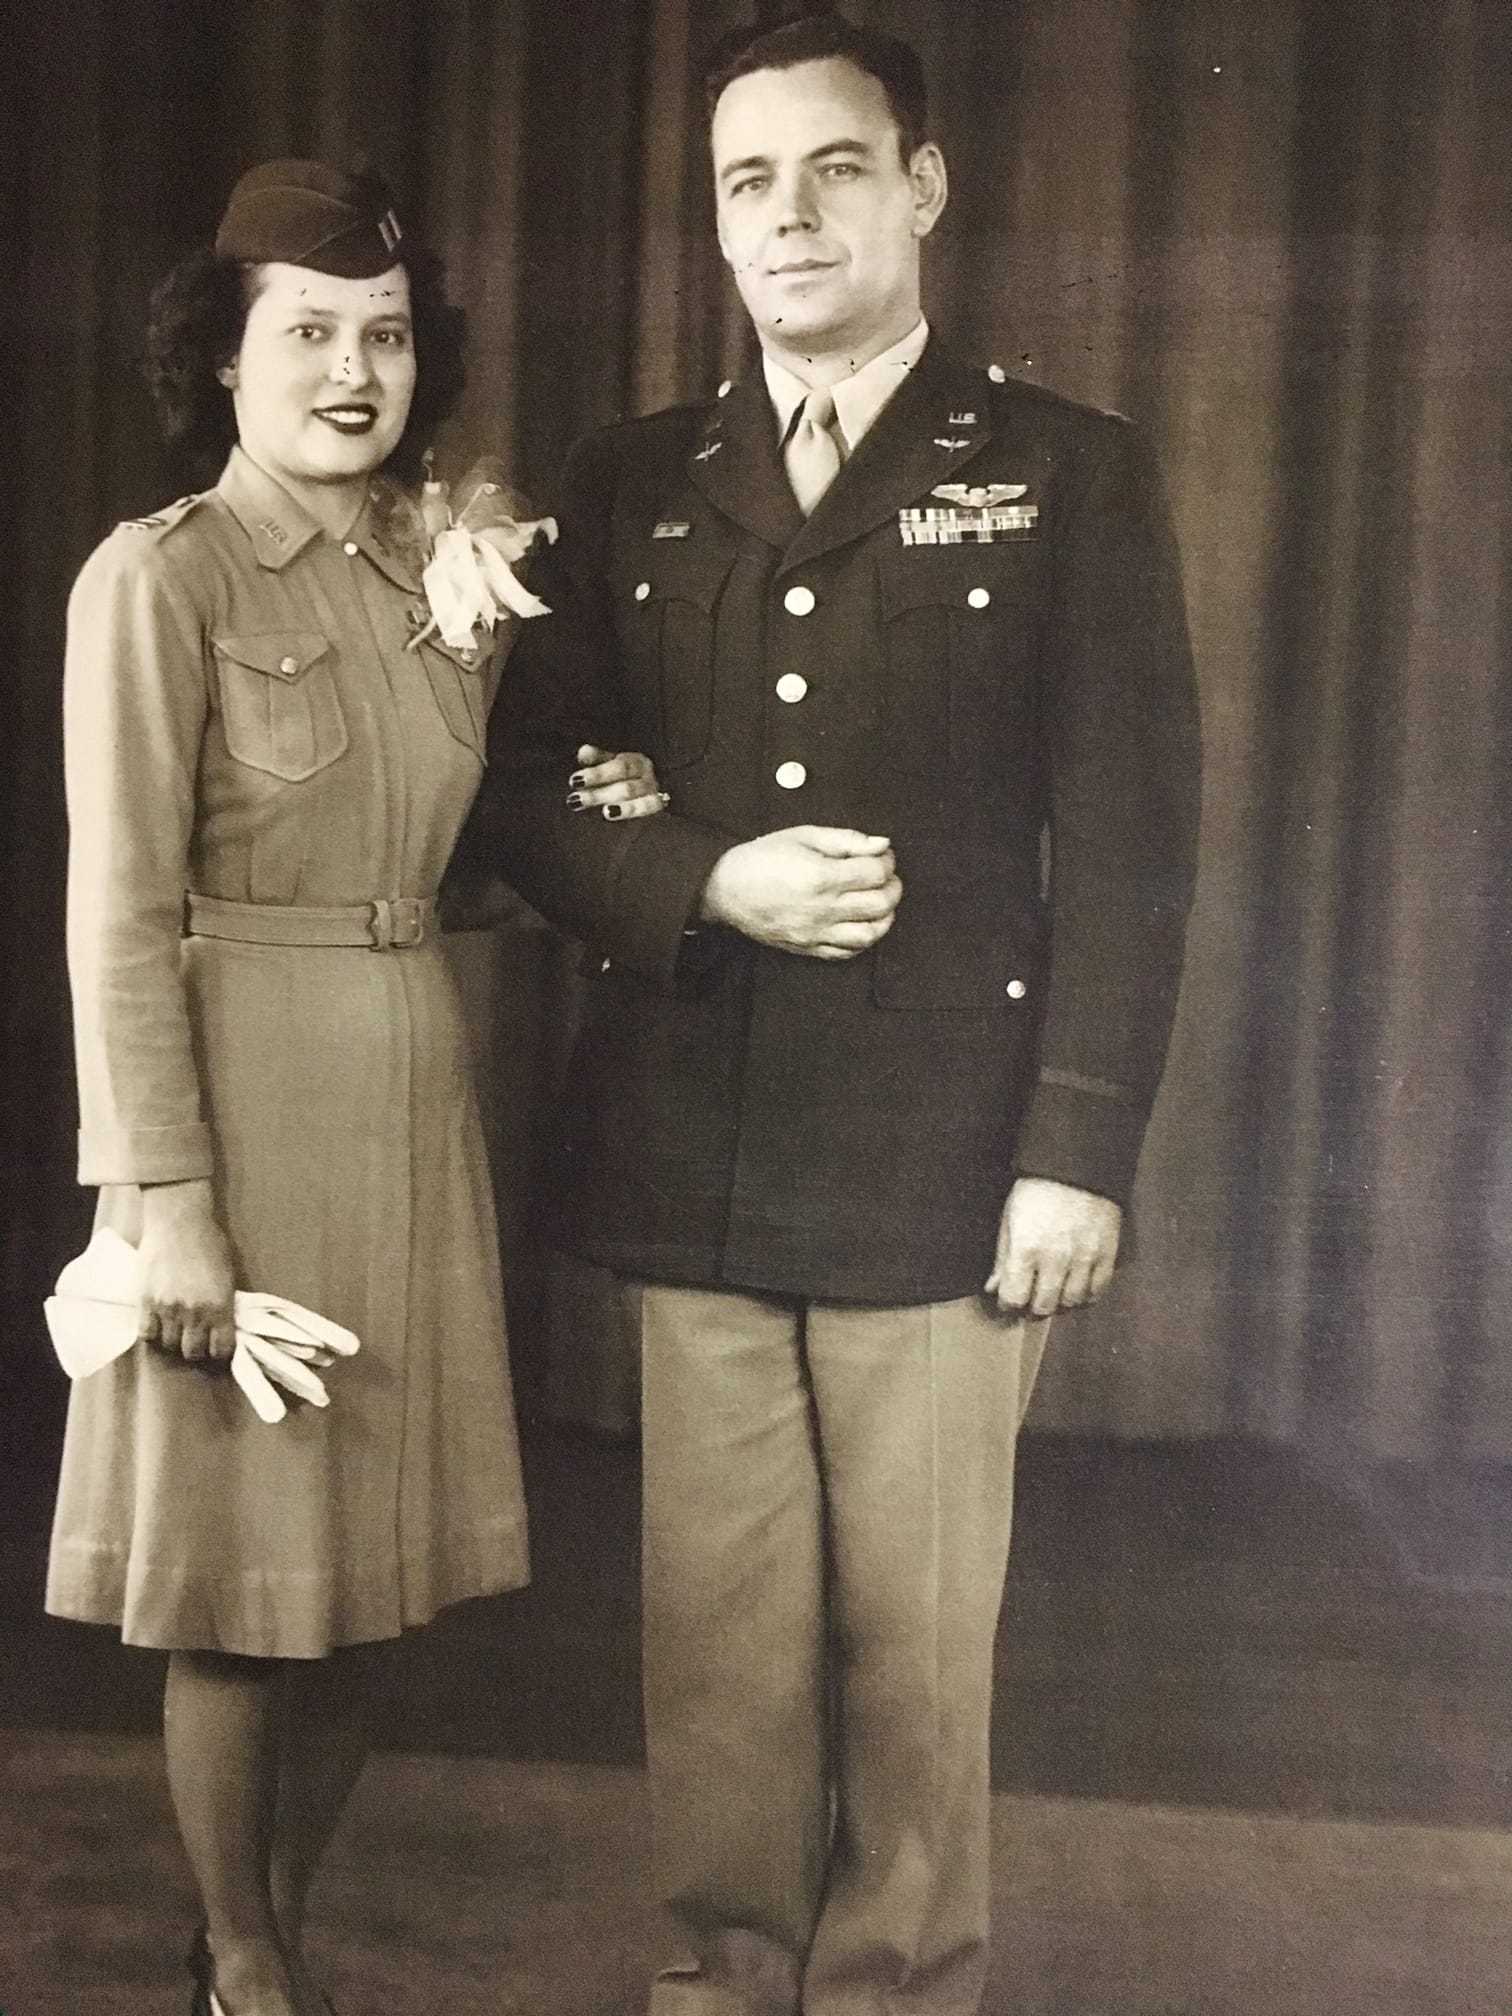 An old photograph of Stephanie leaning on the shoulder of a man in military uniform.